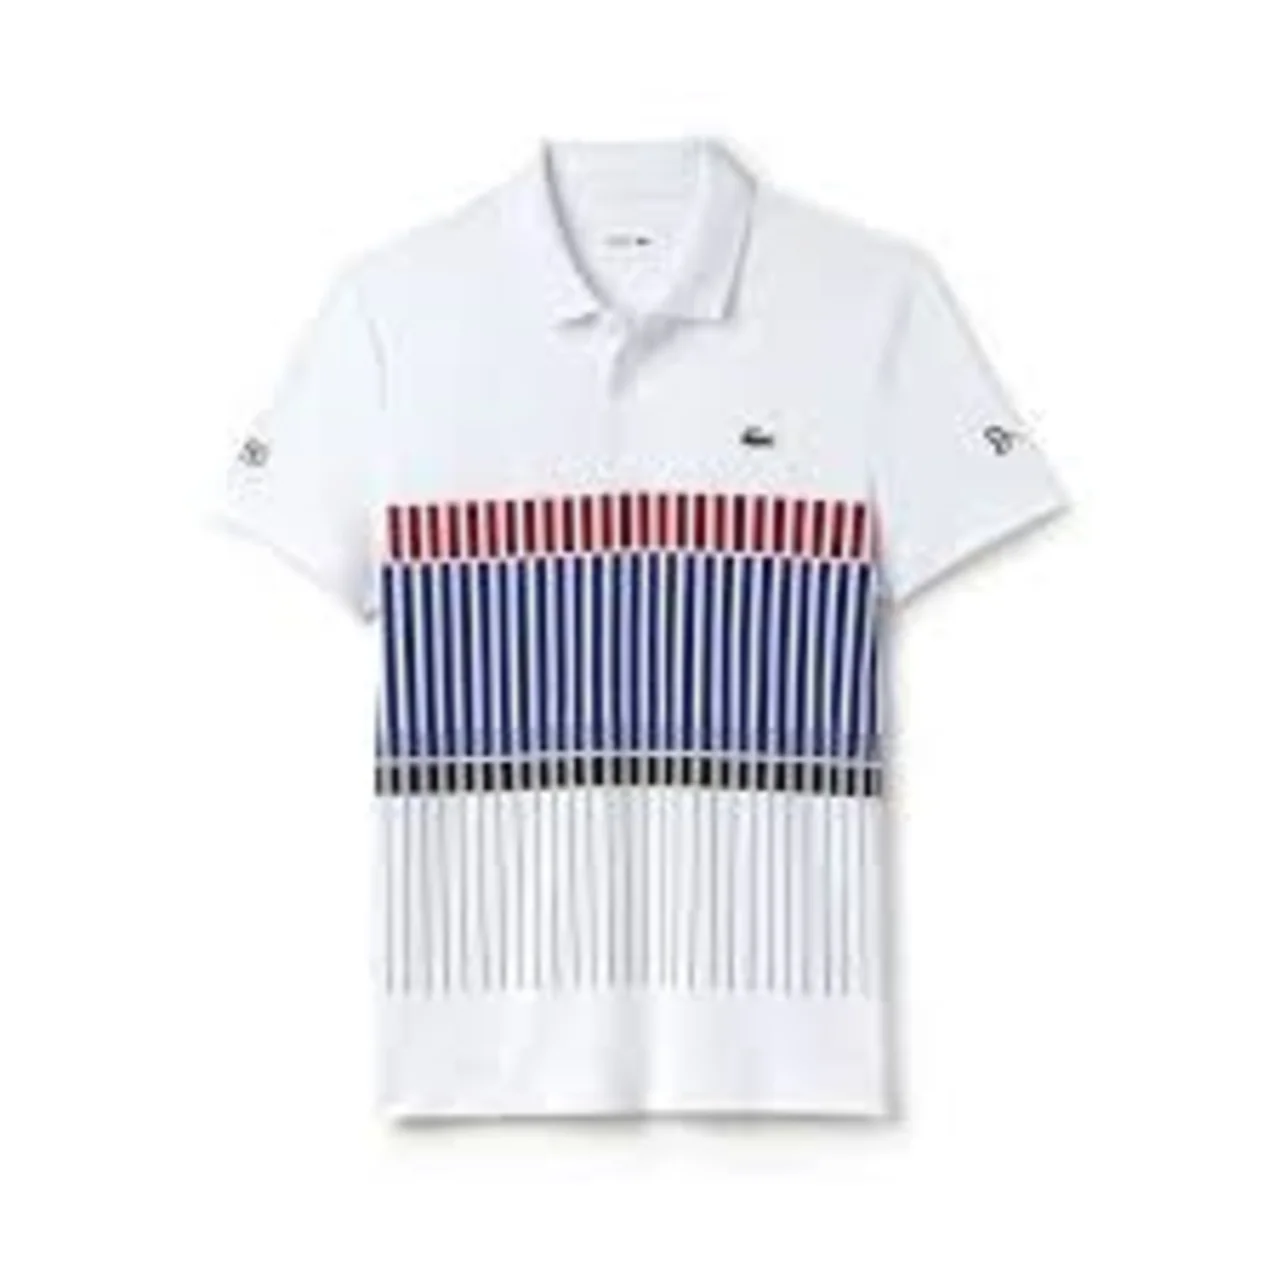 Lacoste Polo Novak Djokovic Collection - Exclusive Clay Edition White Size S